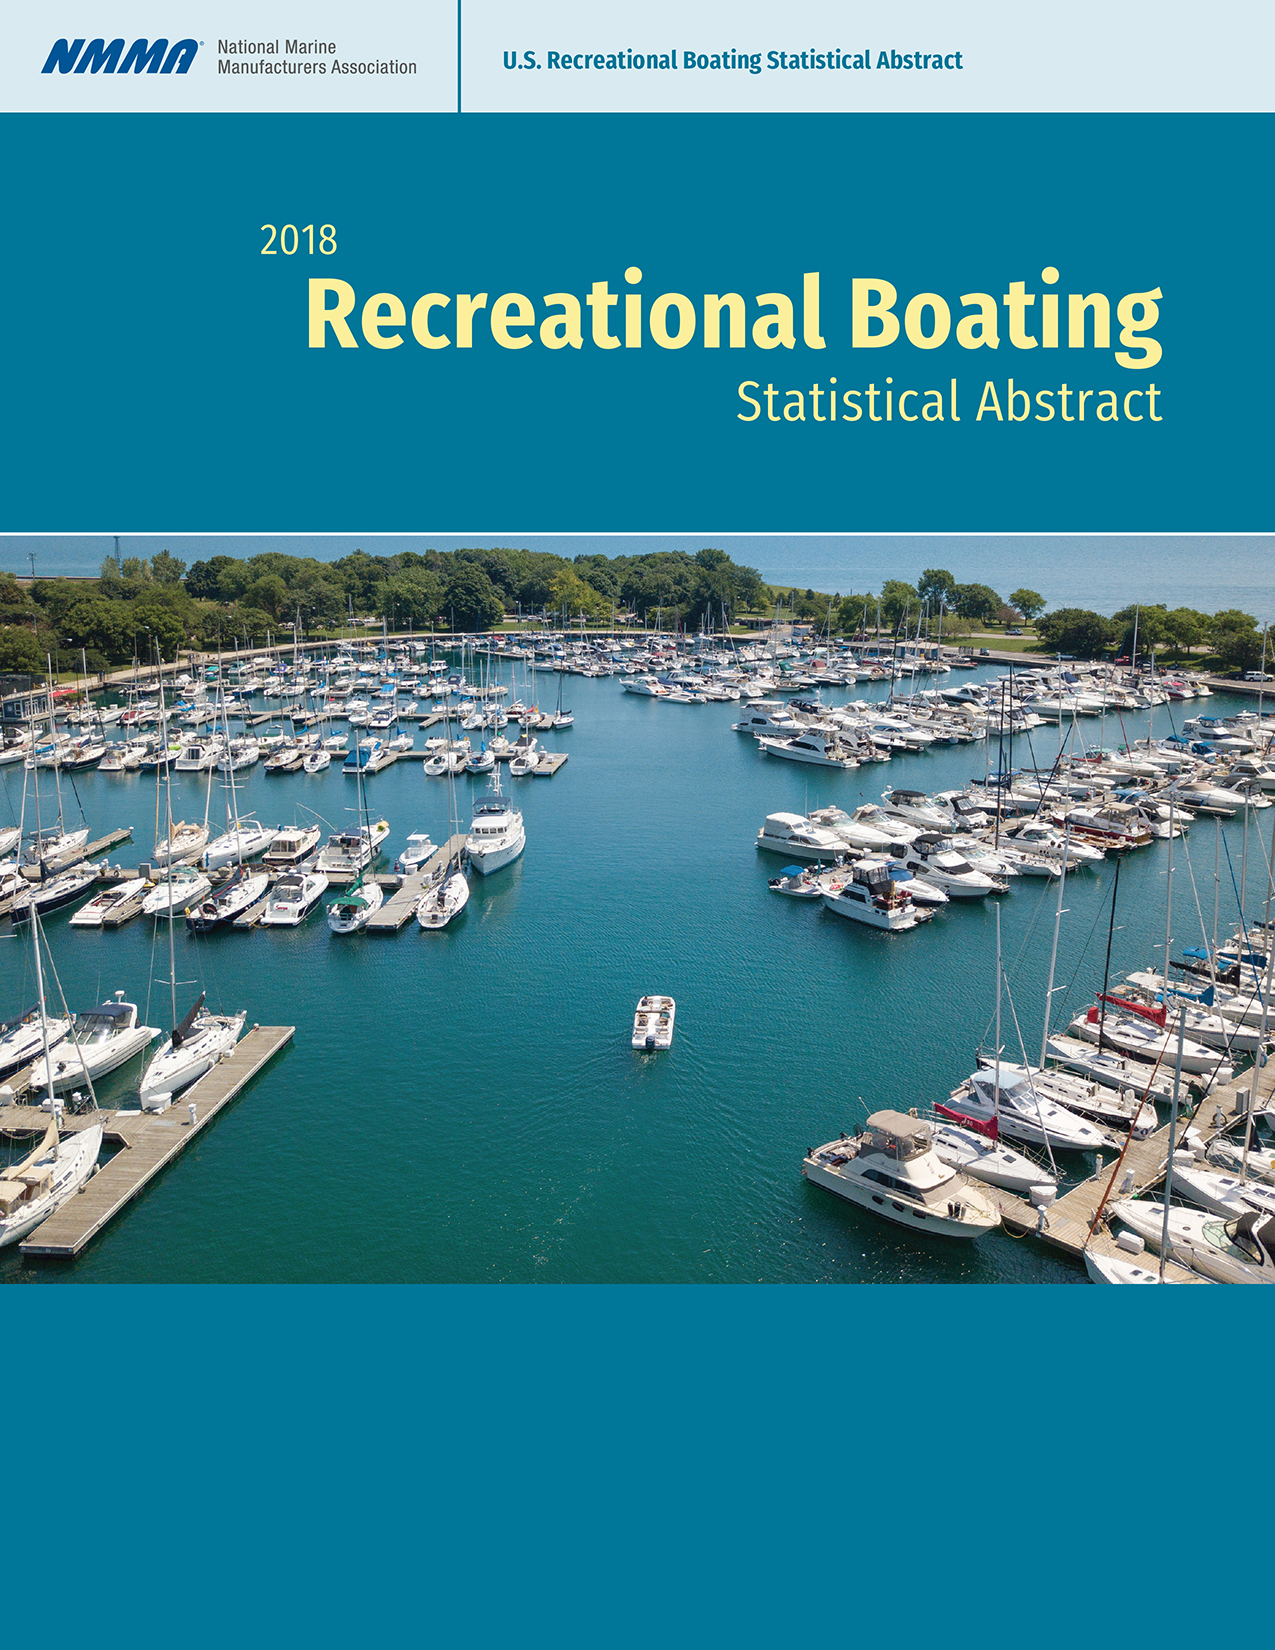 2020 U.S. Recreational Boating Statistical Abstract Full Report